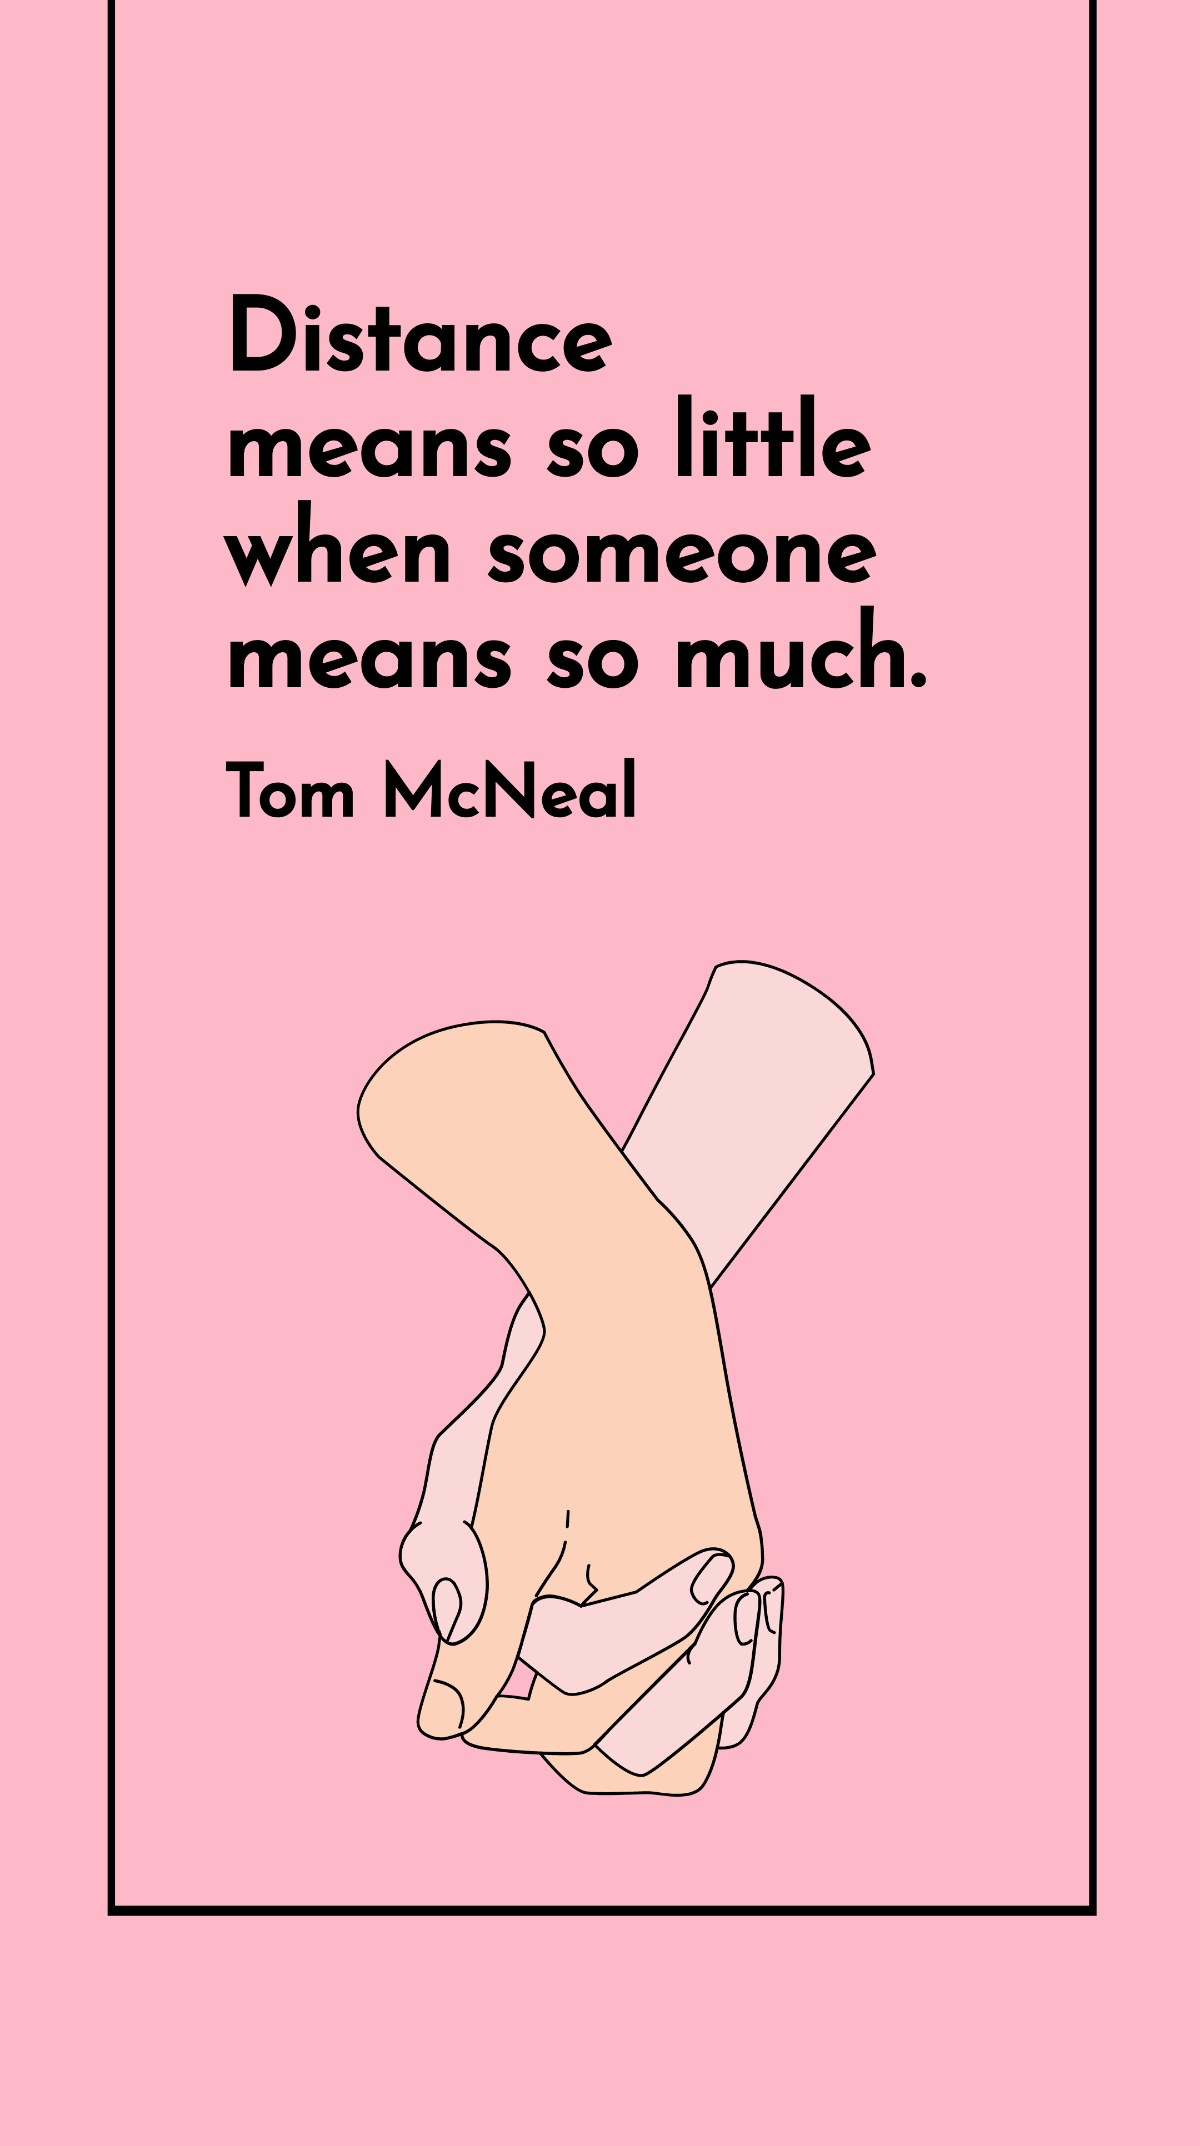 Tom McNeal - Distance means so little when someone means so much. Template